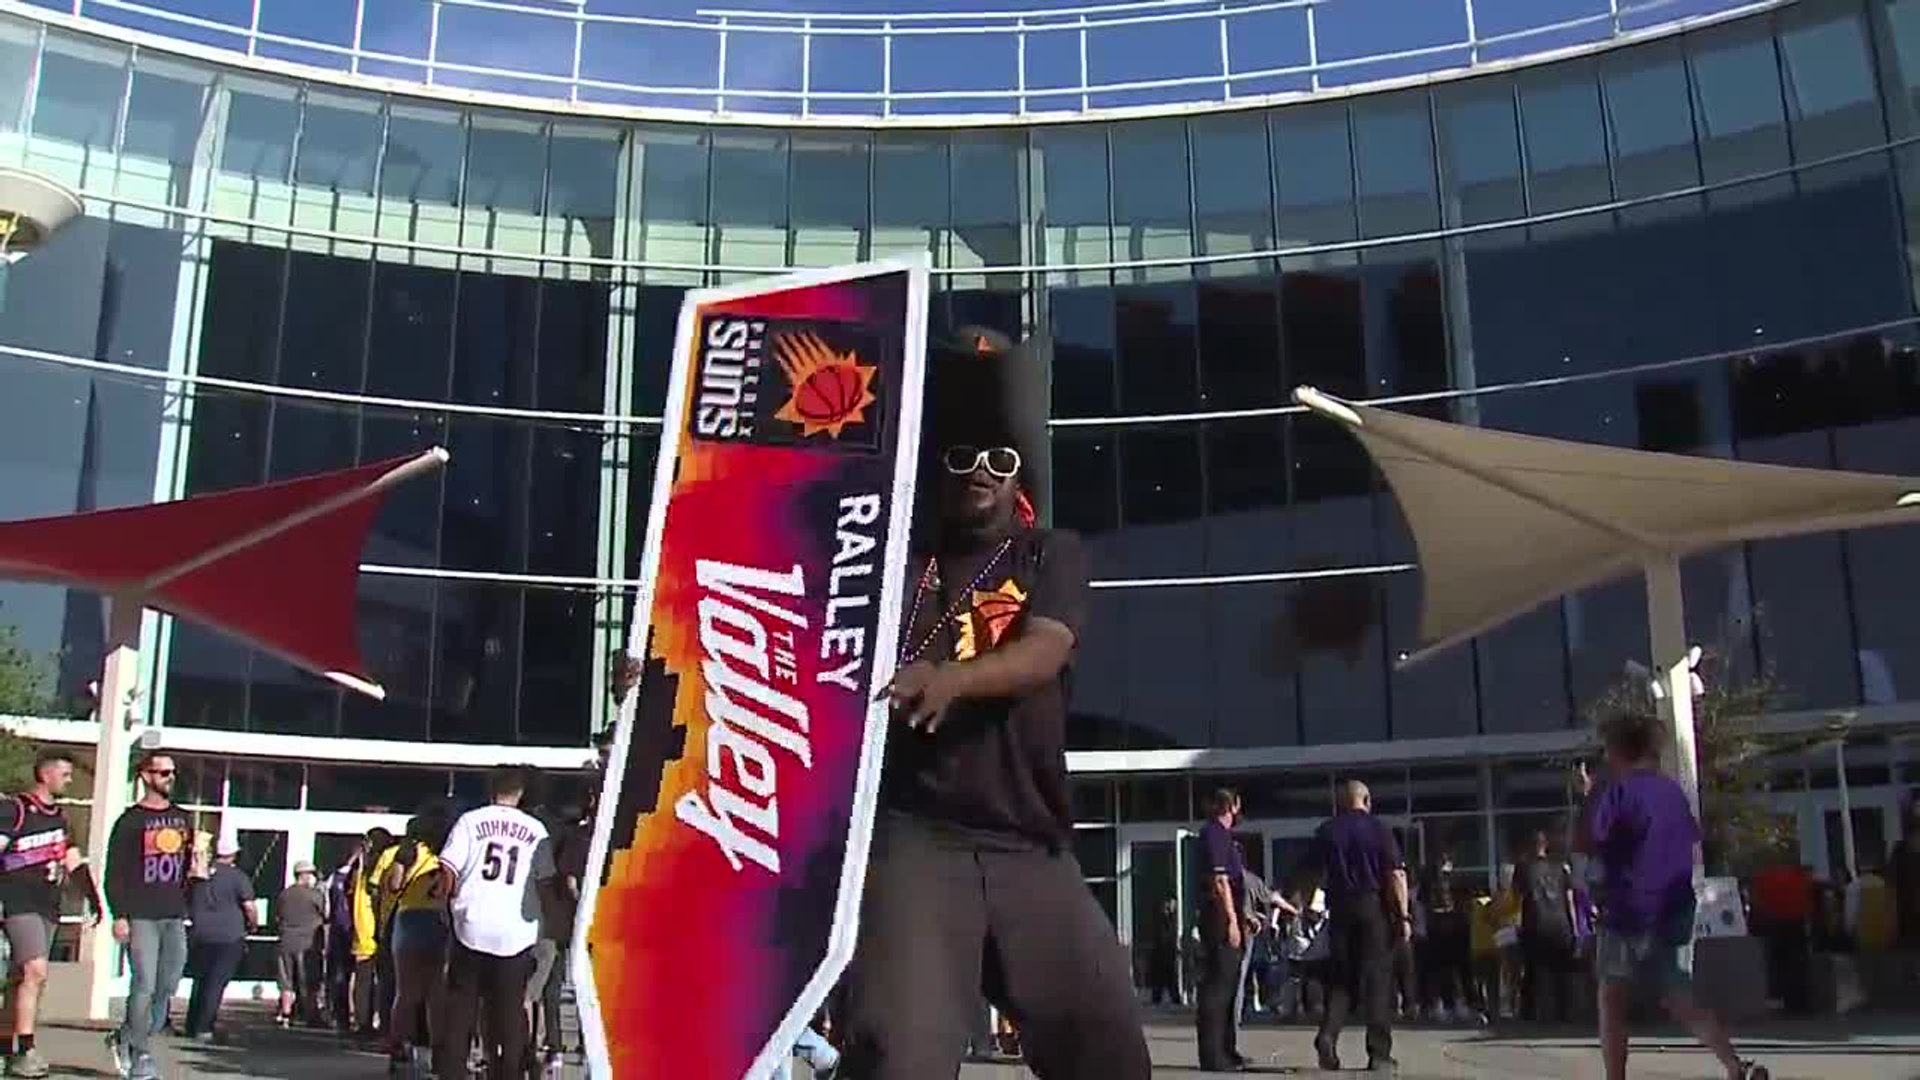 PHX native writes 'Rally the Valley' song for Suns anthem